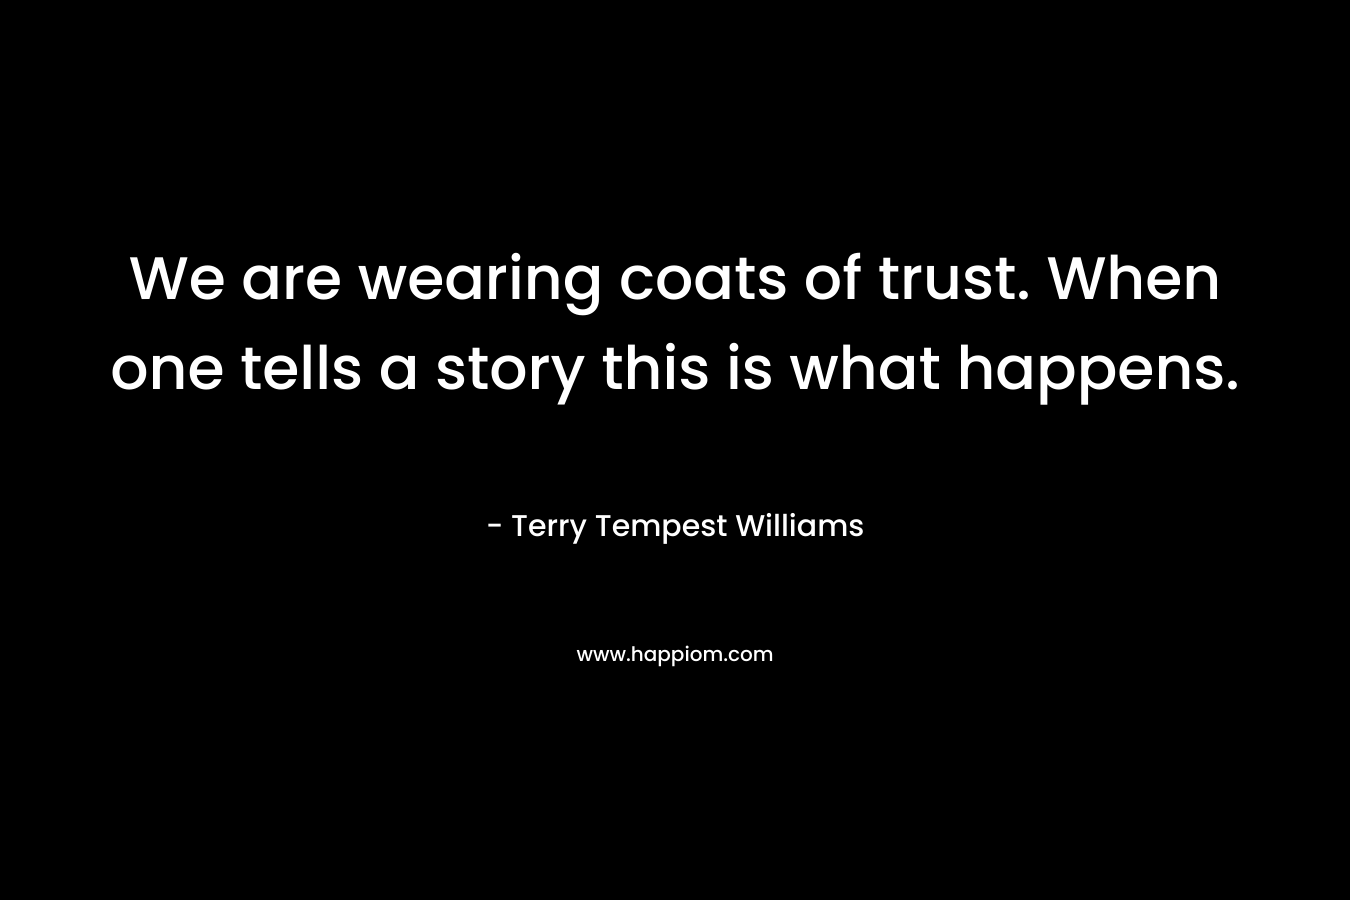 We are wearing coats of trust. When one tells a story this is what happens. – Terry Tempest Williams